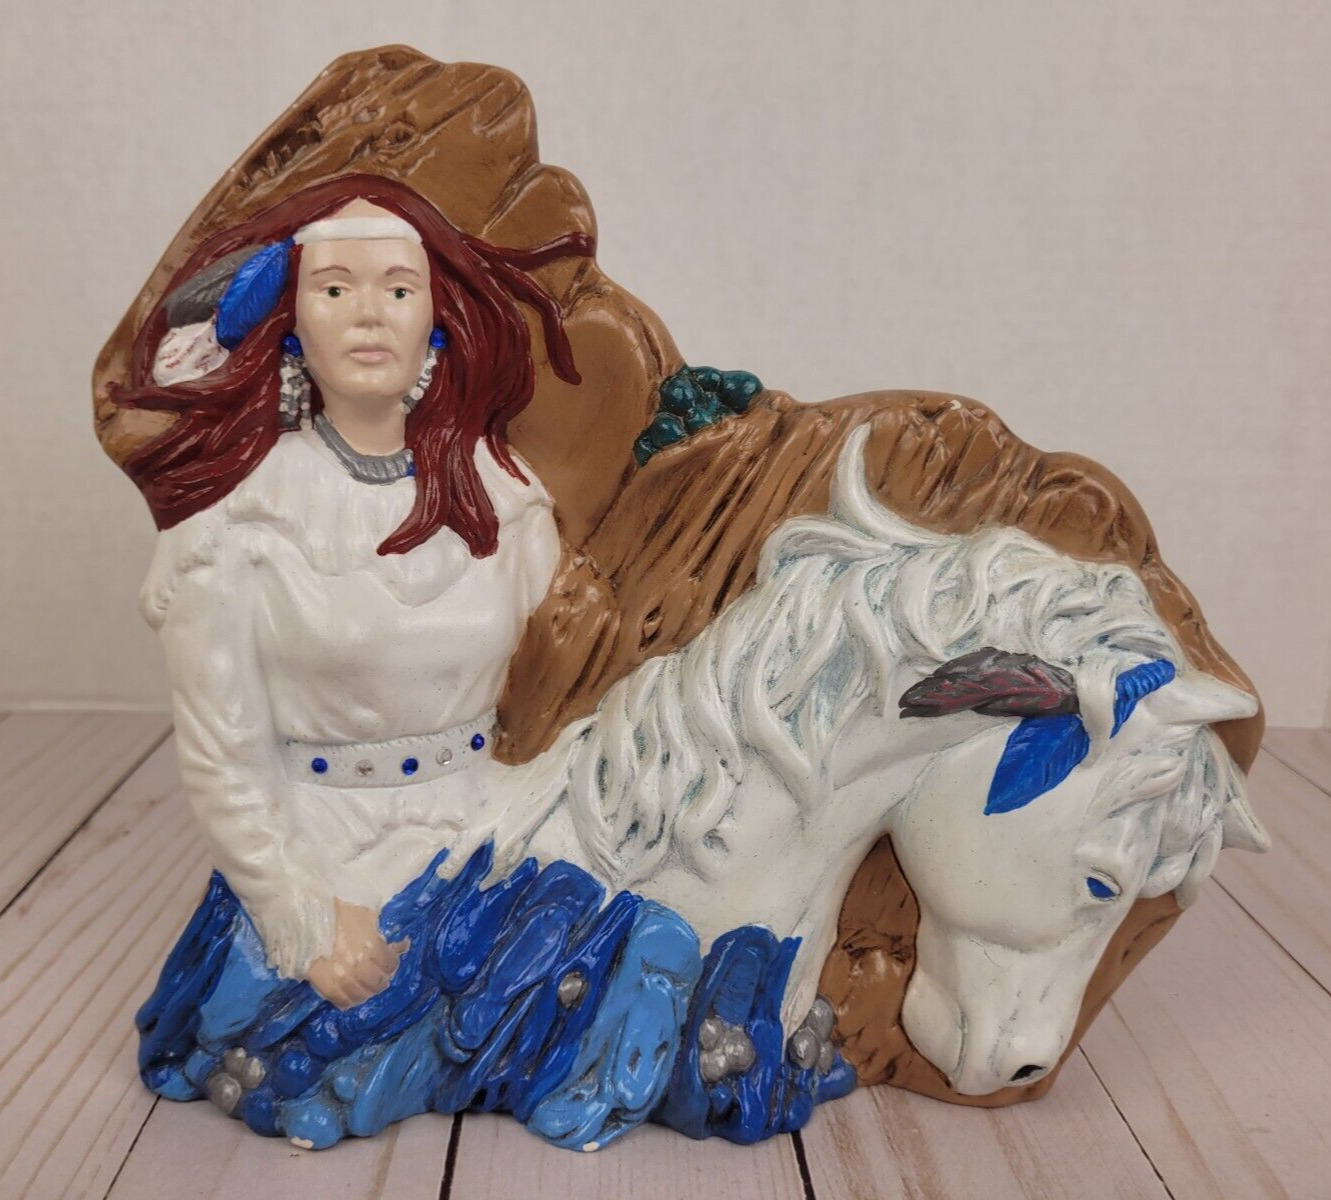 VTG Ceramic Figurine Native American Woman White Horse 1997 Signed Hand Painted